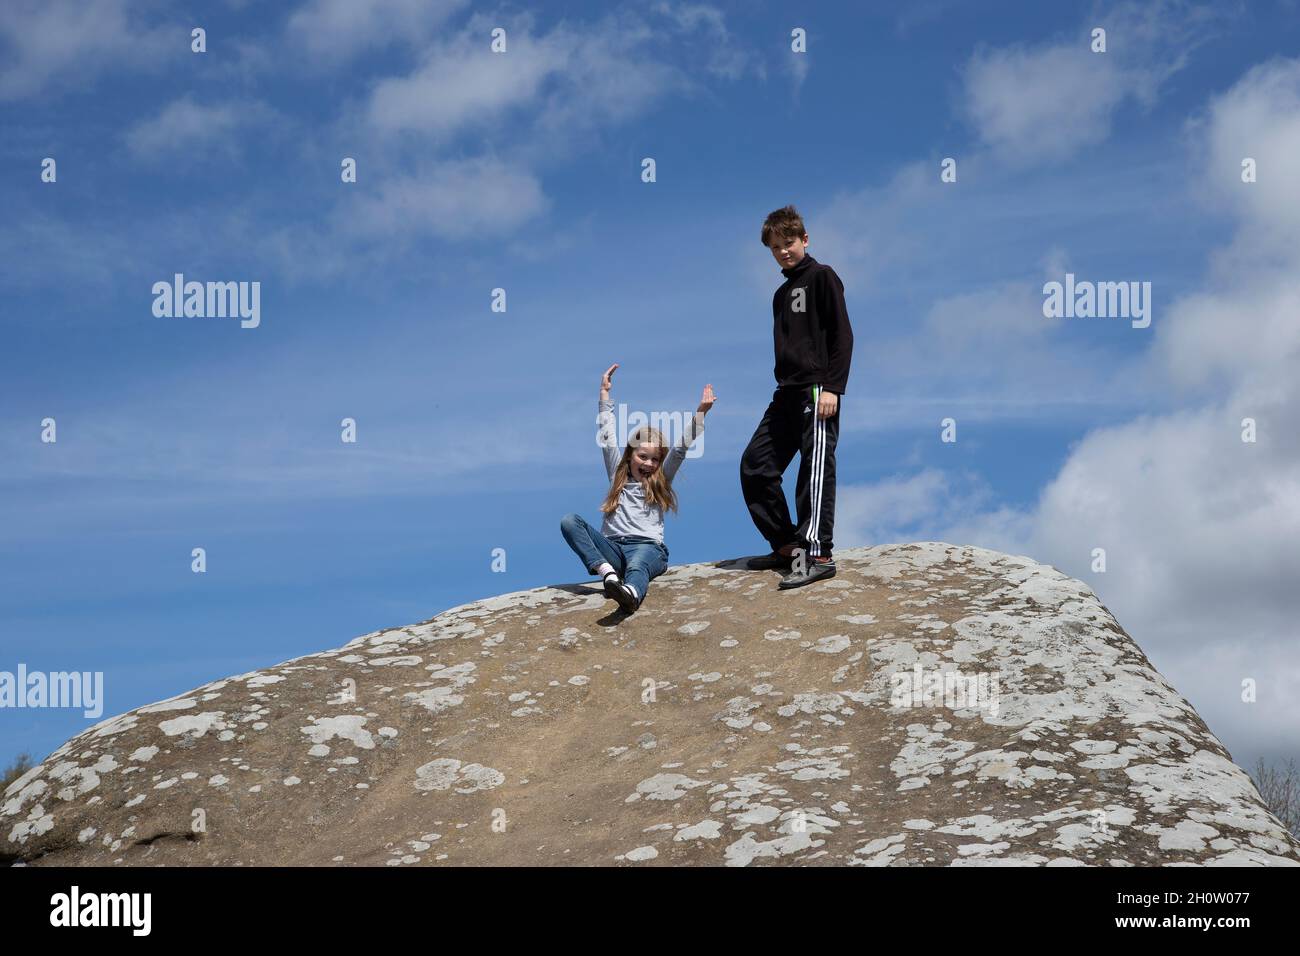 Young boy and girl enjoying themselves having climbed to the top of a large rock against a blue summer sky in northern England U.K. Stock Photo